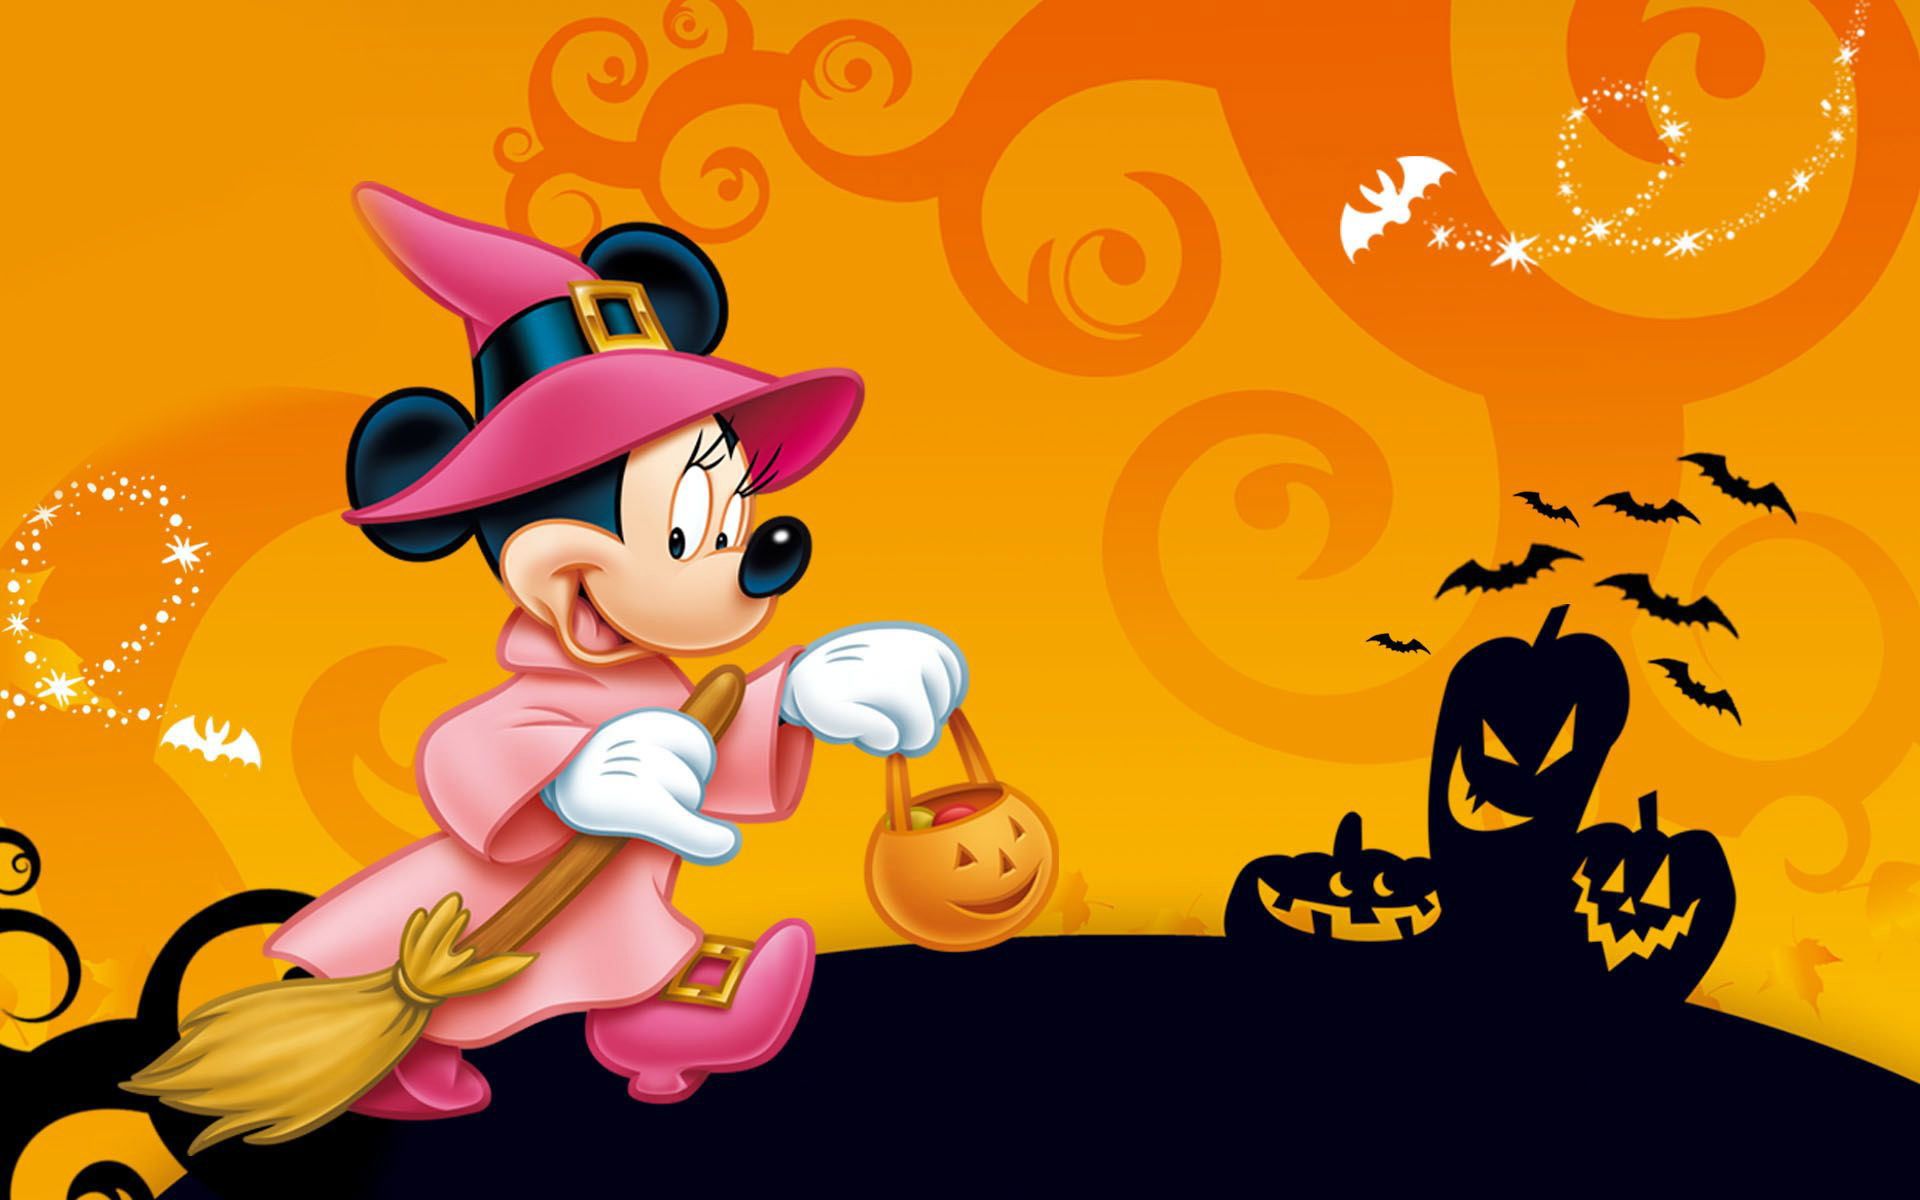 Halloween Minnie Mouse wallpaper - Cartoons wallpapers - #24389 - Minnie Mouse